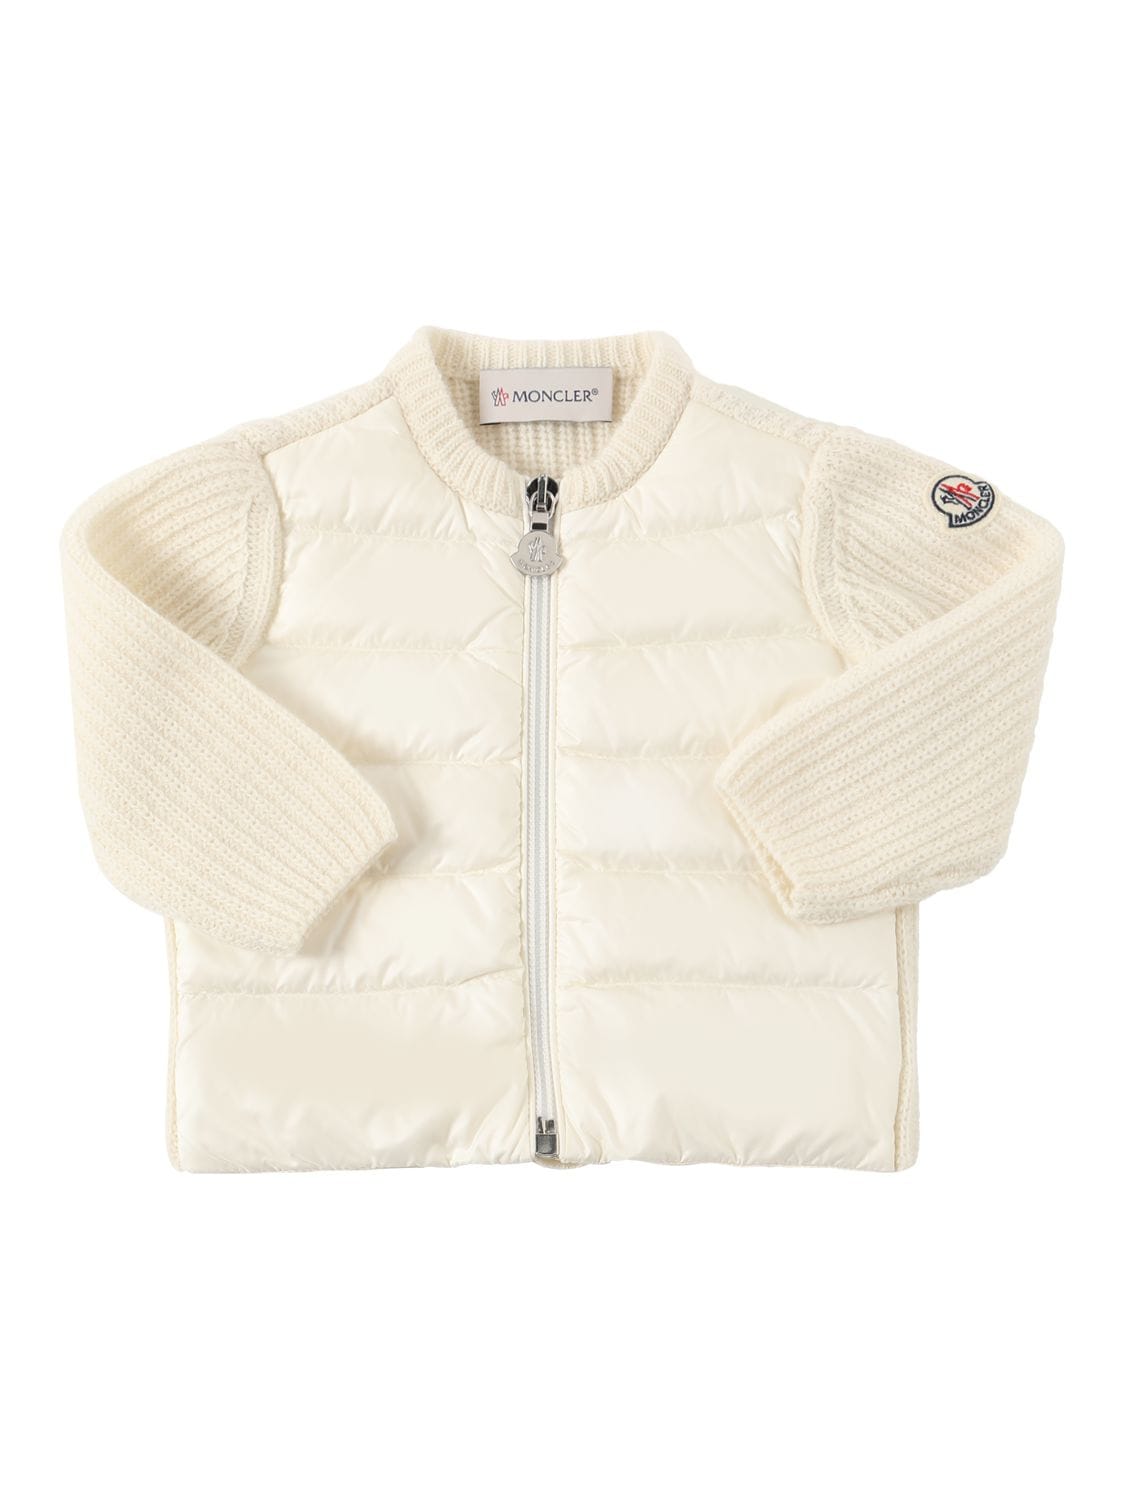 Moncler Kids' Wool Tricot & Nylon Down Jacket In Natural